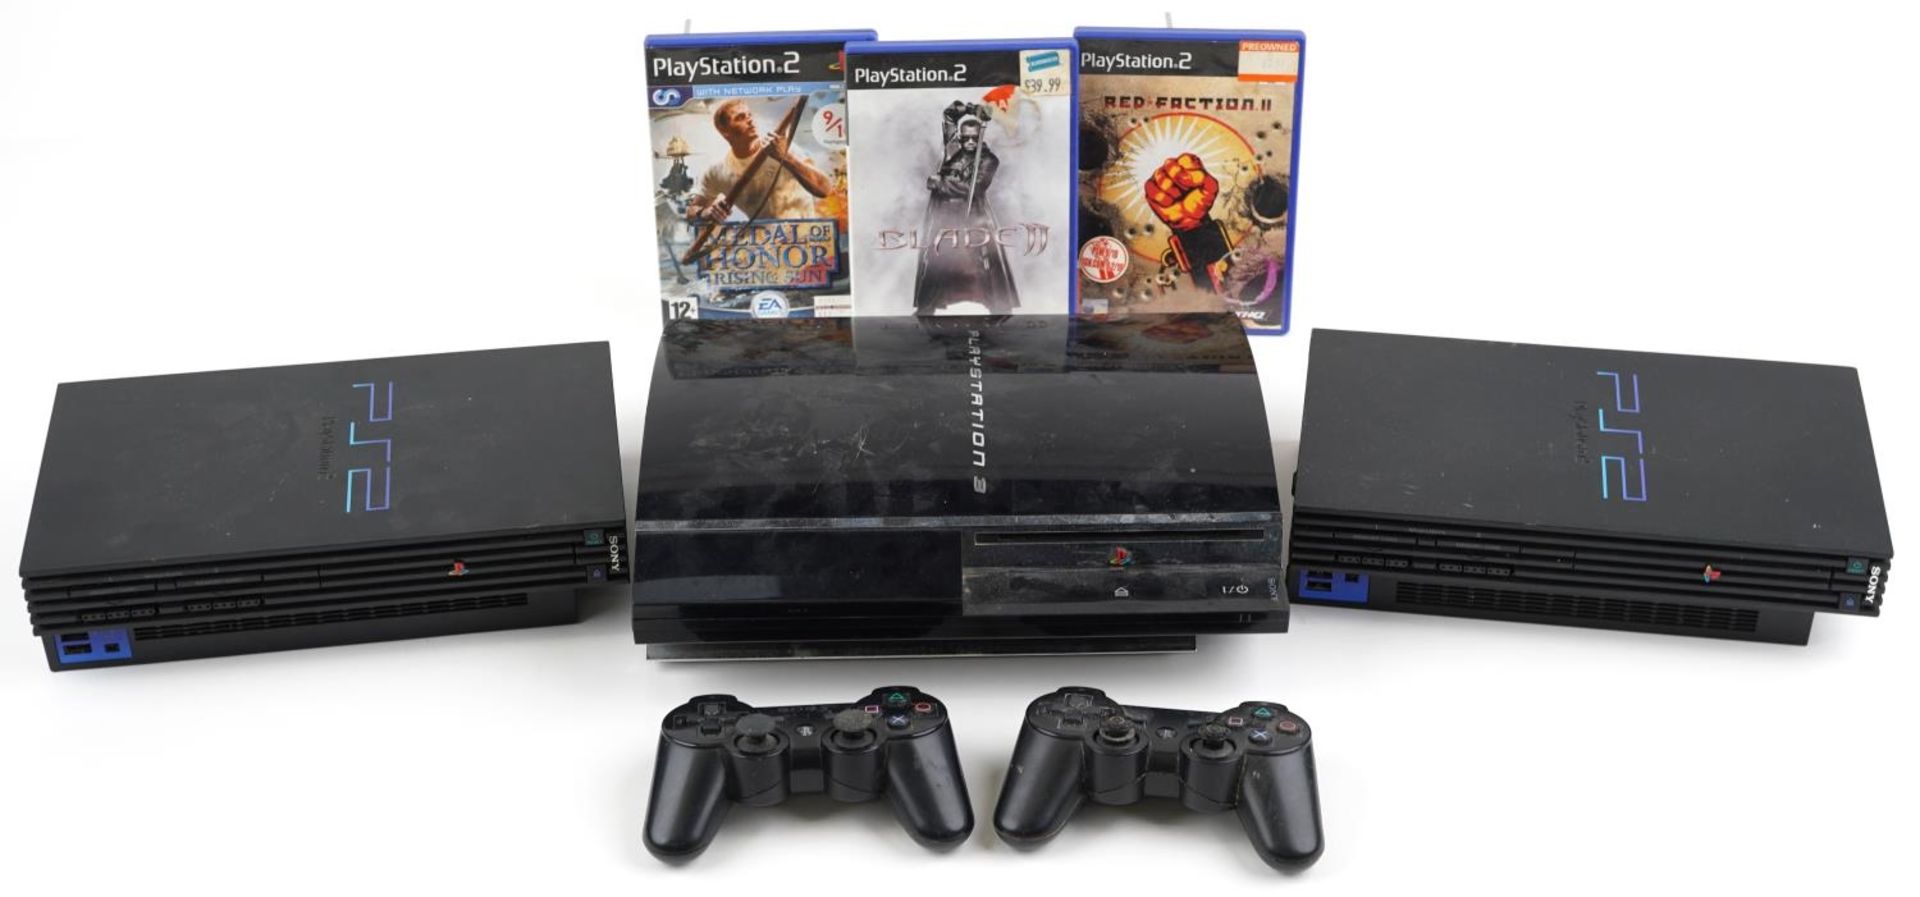 Sony PlayStation 3 games console with two controllers and two Sony PlayStation 2 games consoles with